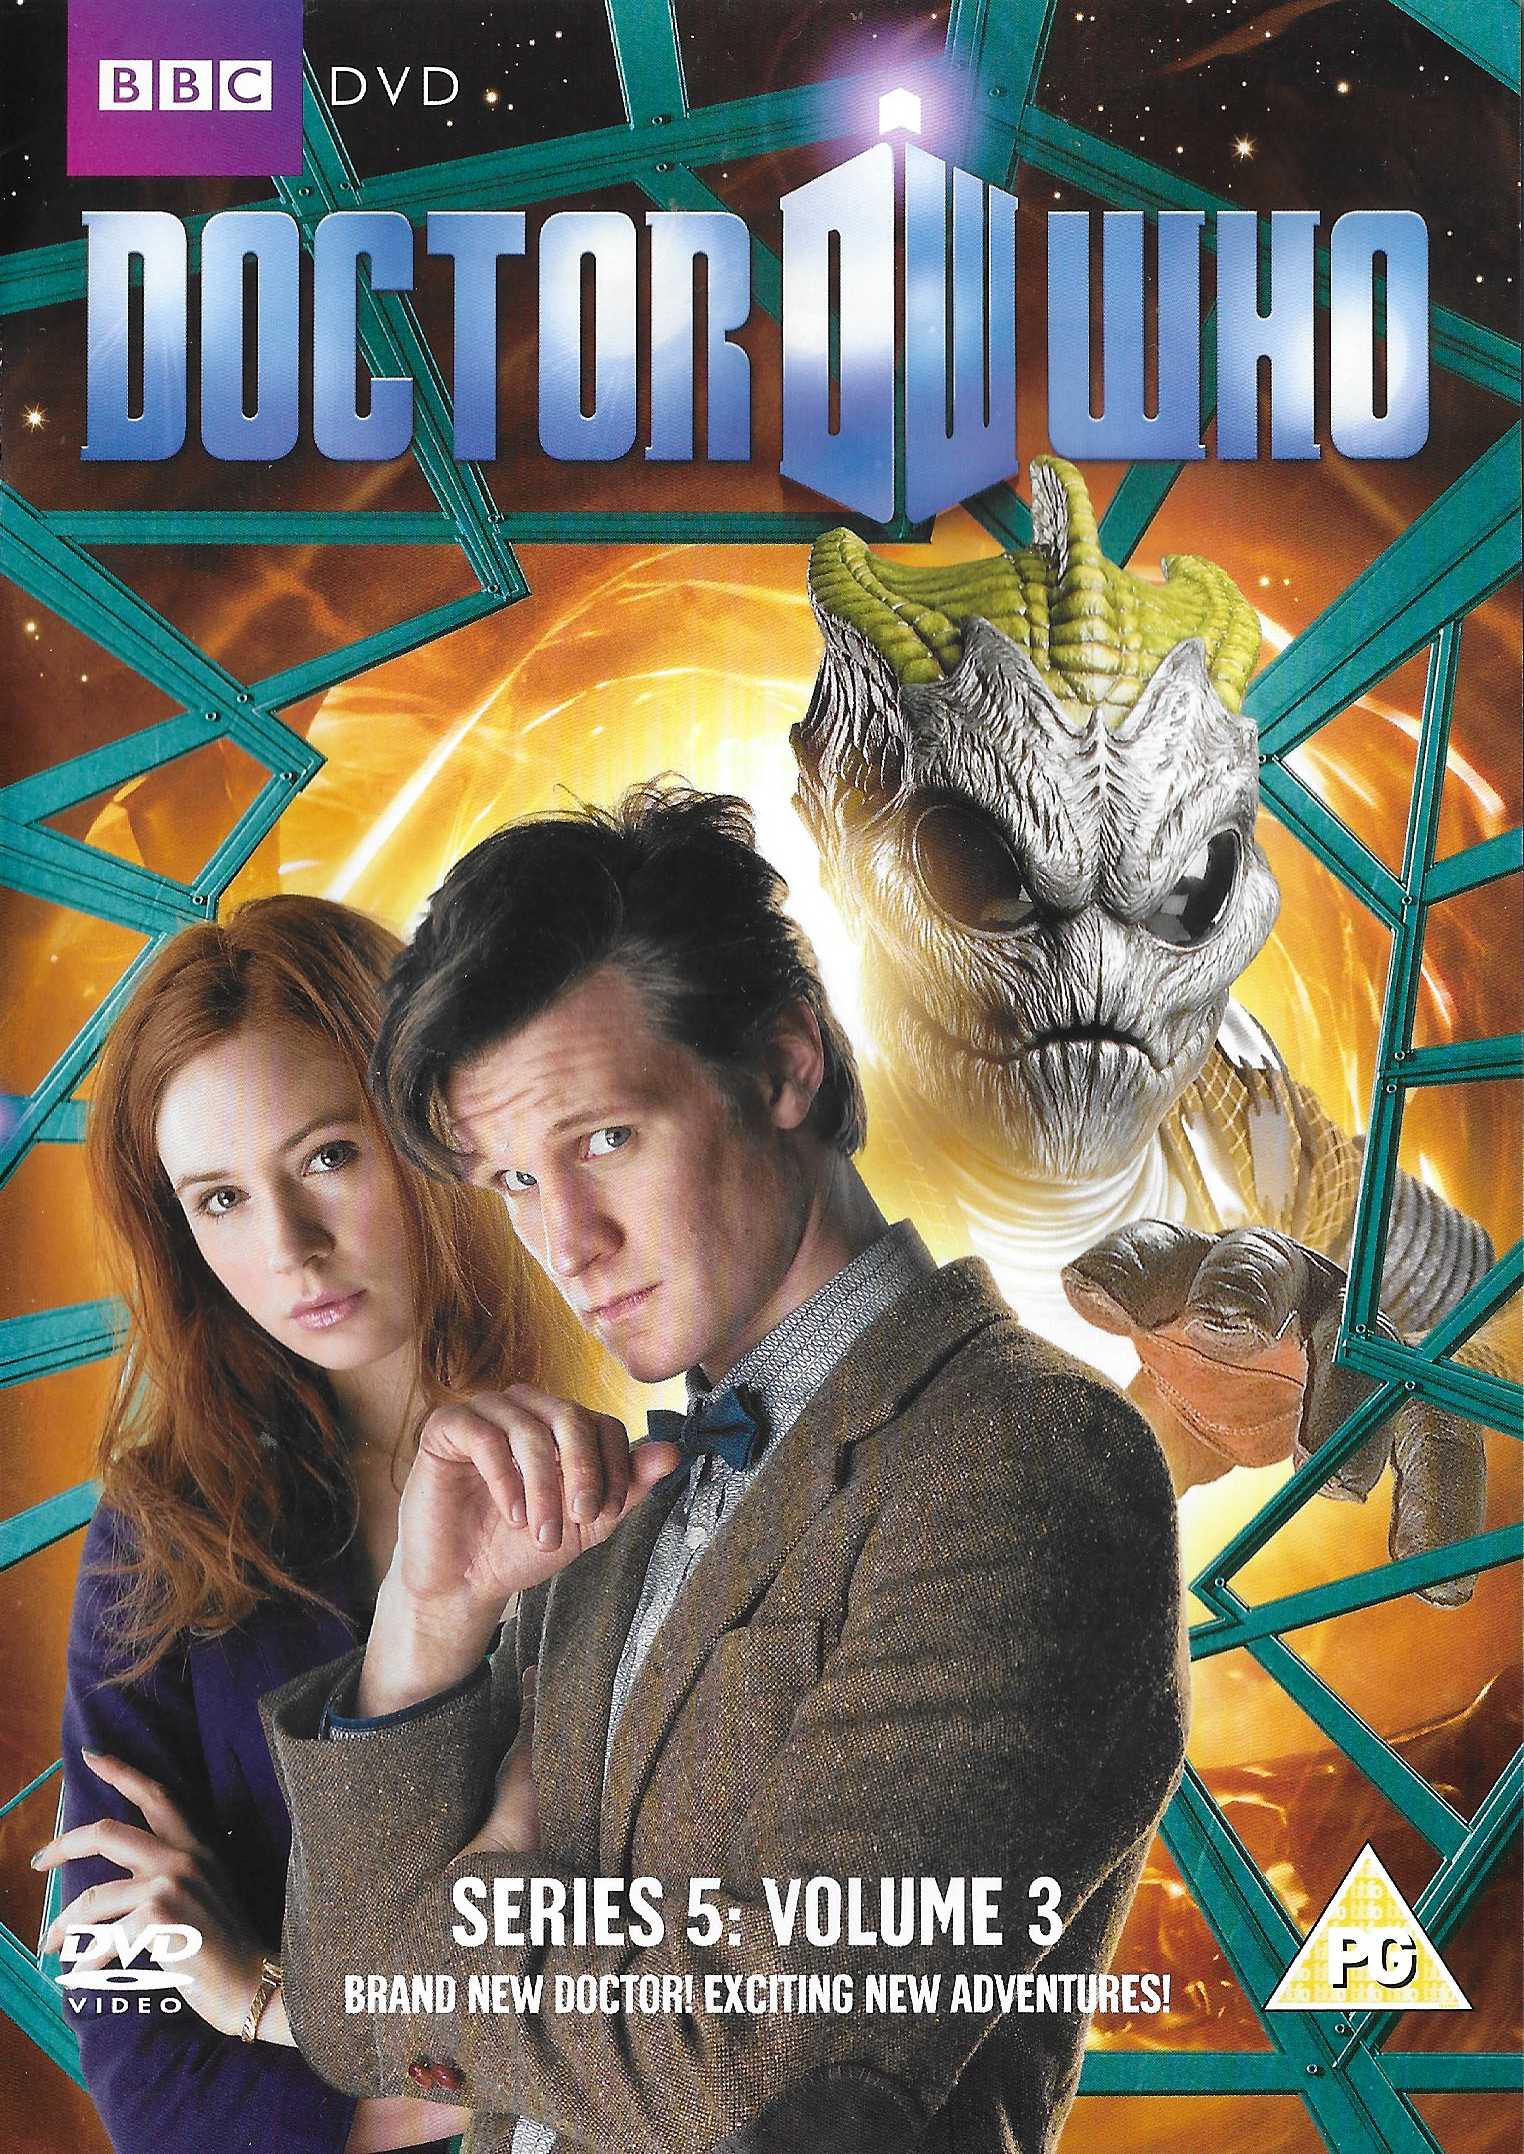 Picture of BBCDVD 3215 Doctor Who - Series 5, volume 3 by artist Simon Nye / Chris Chibnall from the BBC records and Tapes library